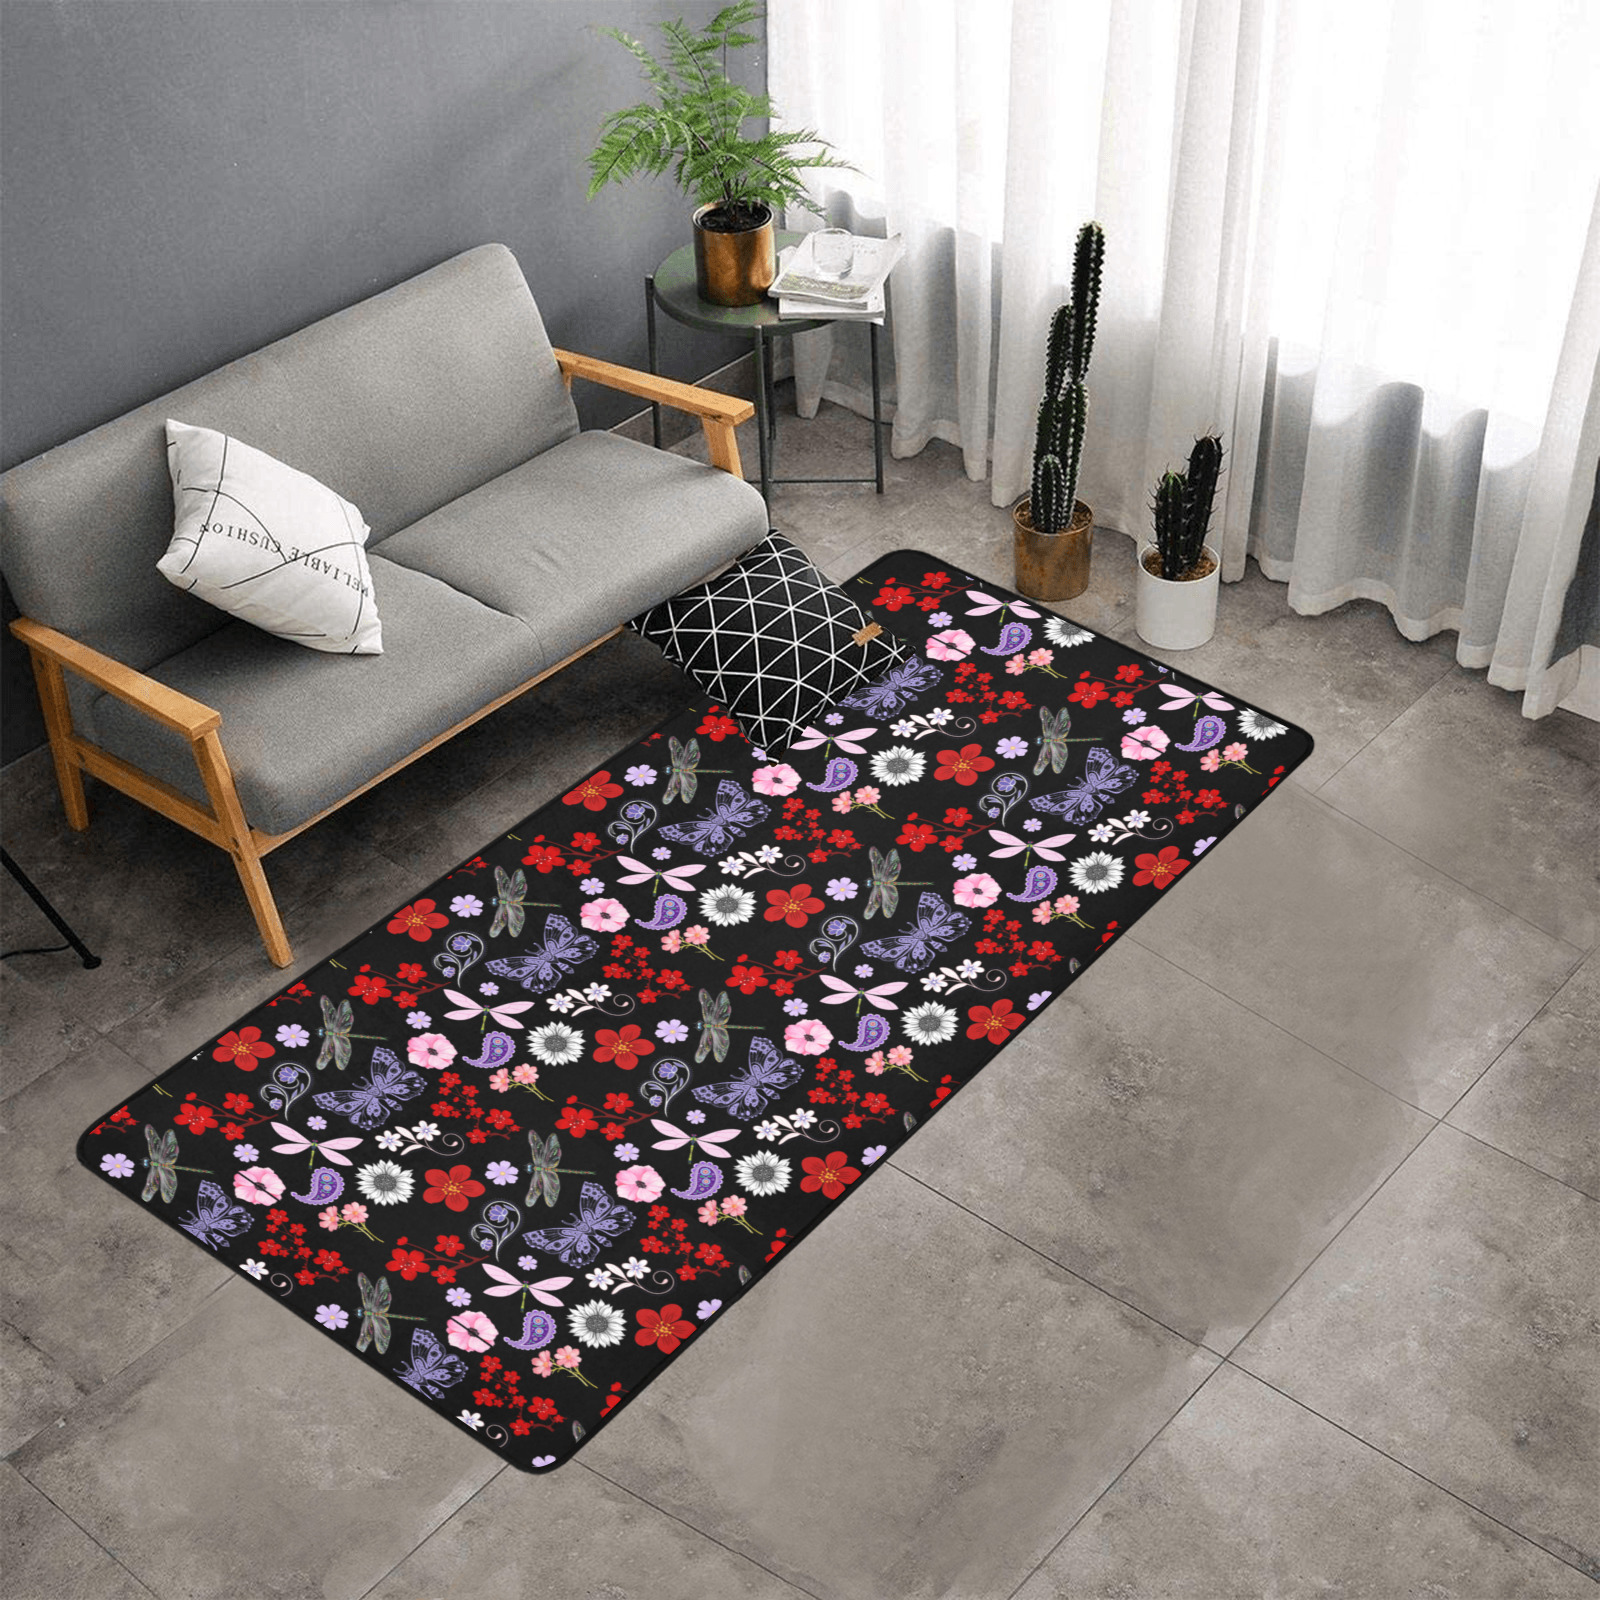 Black, Red, Pink, Purple, Dragonflies, Butterfly and Flowers Design Area Rug with Black Binding  7'x3'3''